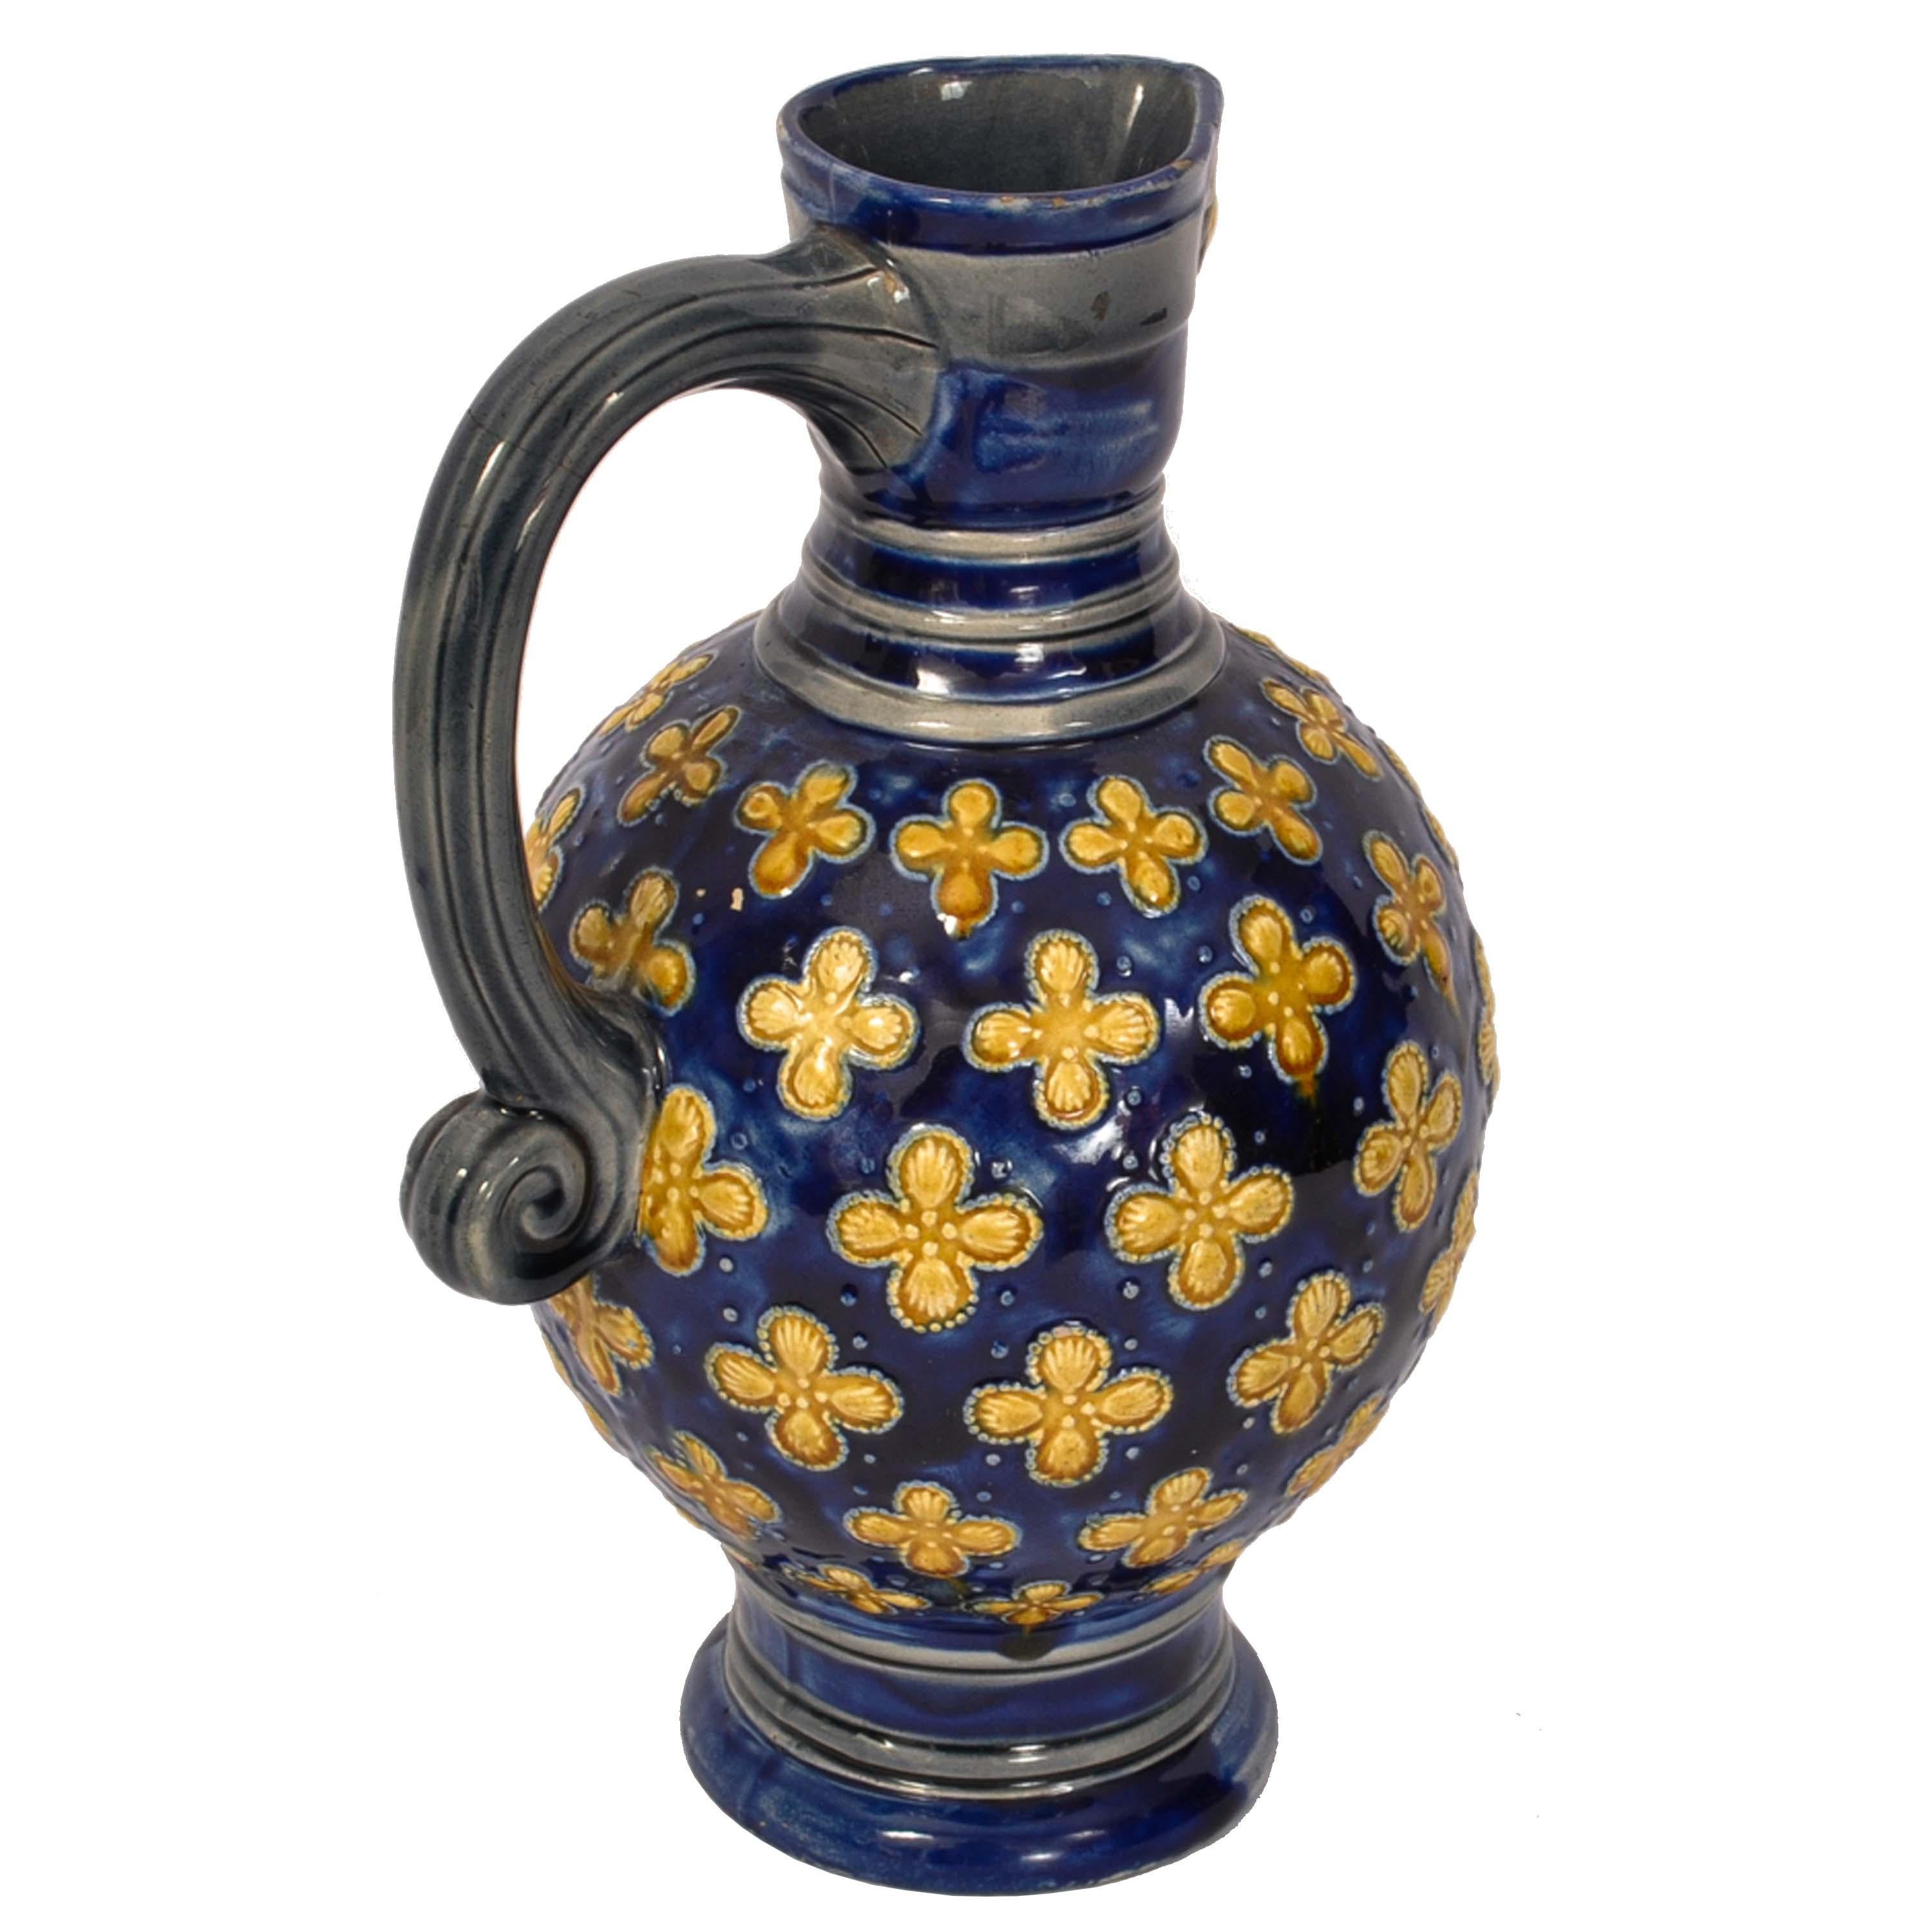 Antique English Minton Majolica Pottery Blue Pottery Beer Jug Pitcher 1870 In Good Condition For Sale In Portland, OR